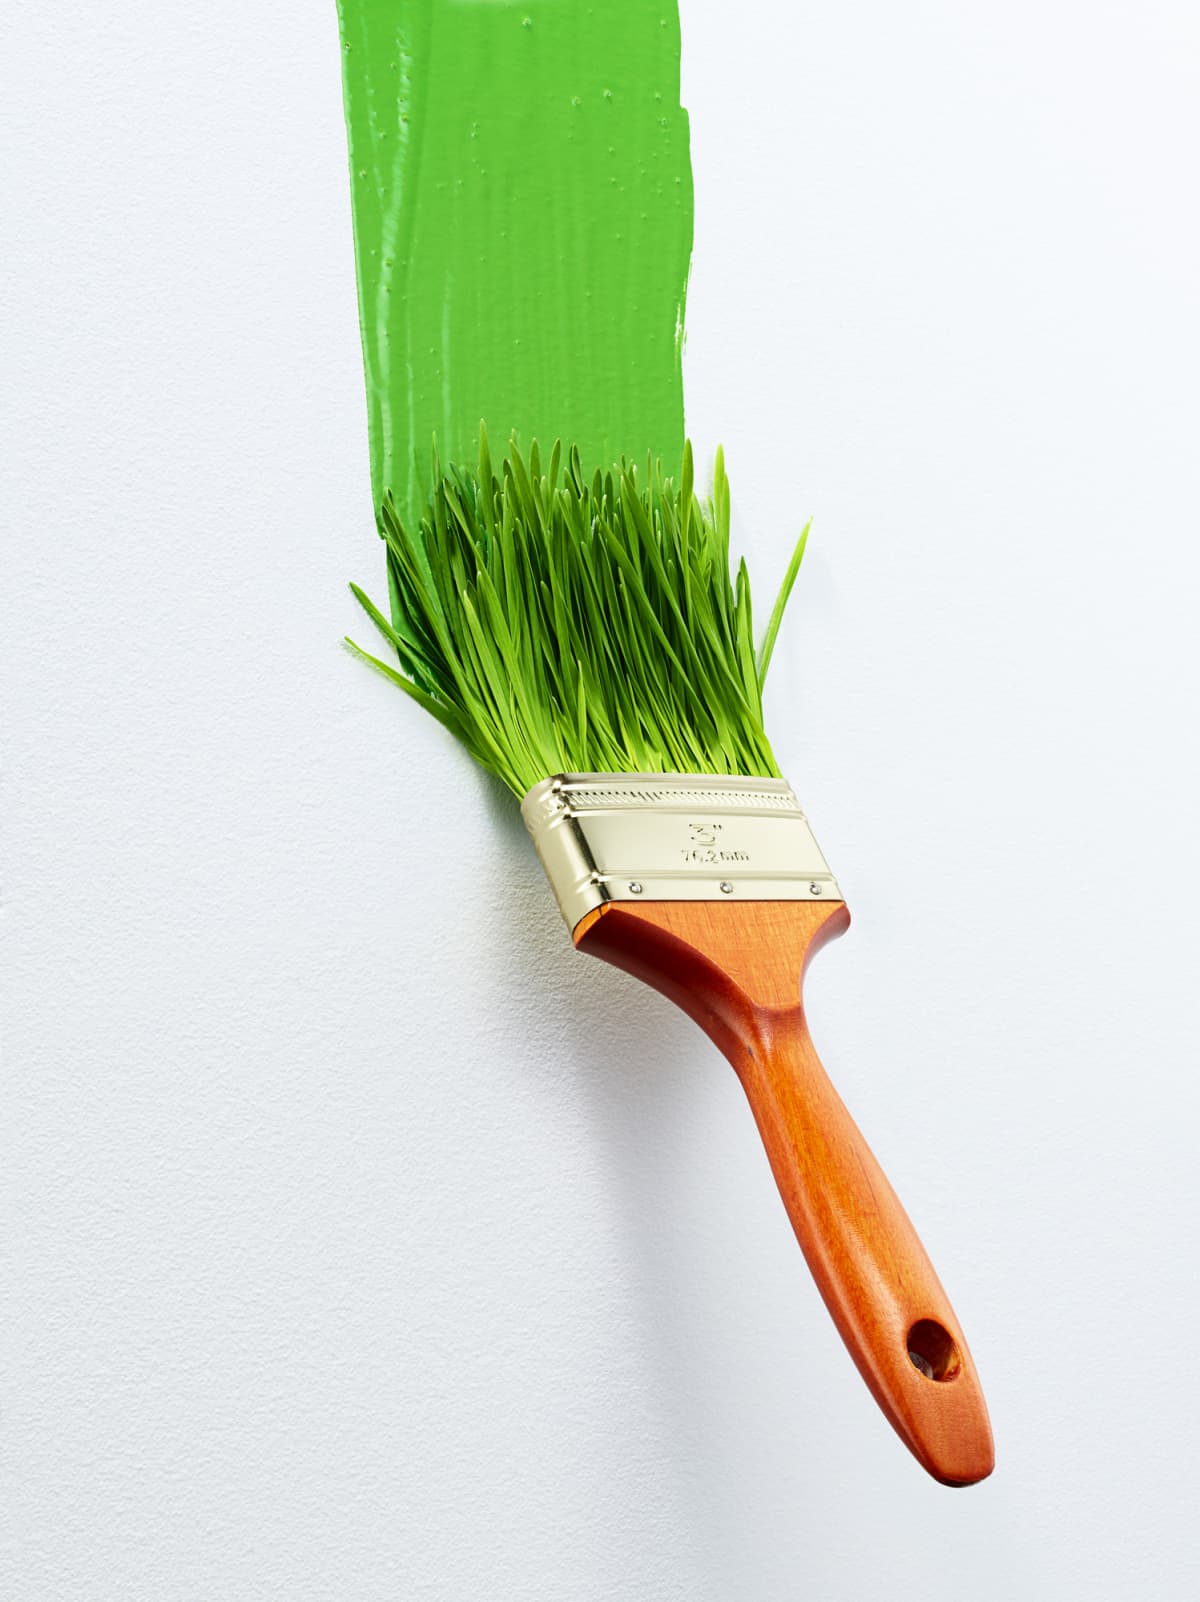 Green stripe of paint being applied by paintbrush